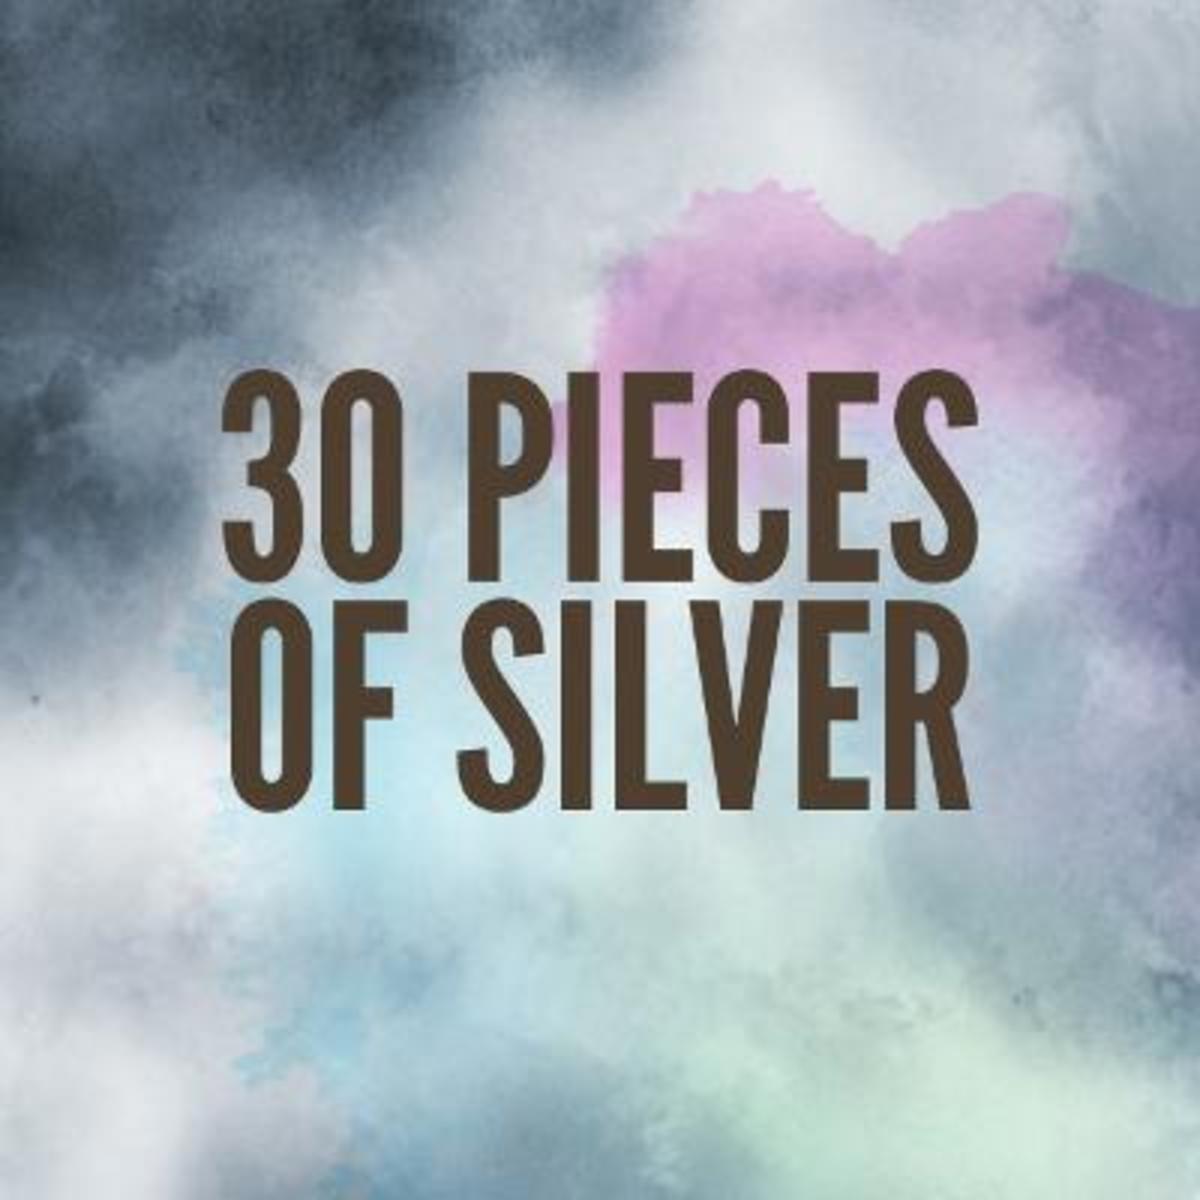 why-jesus-was-betrayed-for-thirty-pieces-of-silver